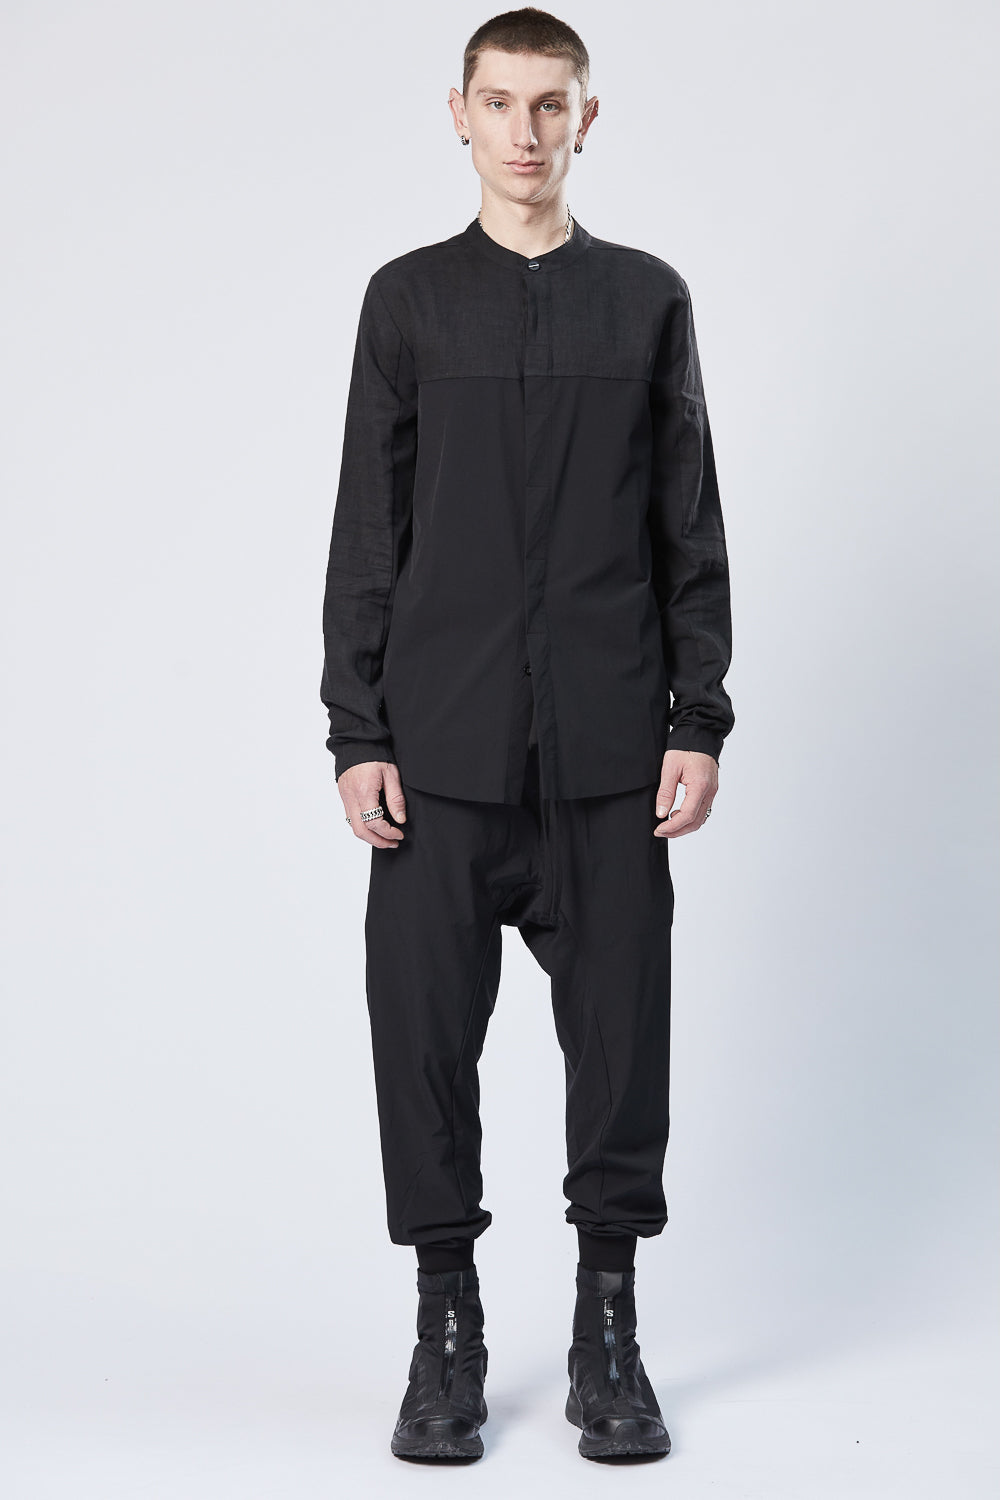 Buy the Thom Krom M H 147 Shirt in Black at Intro. Spend £50 for free UK delivery. Official stockists. We ship worldwide.